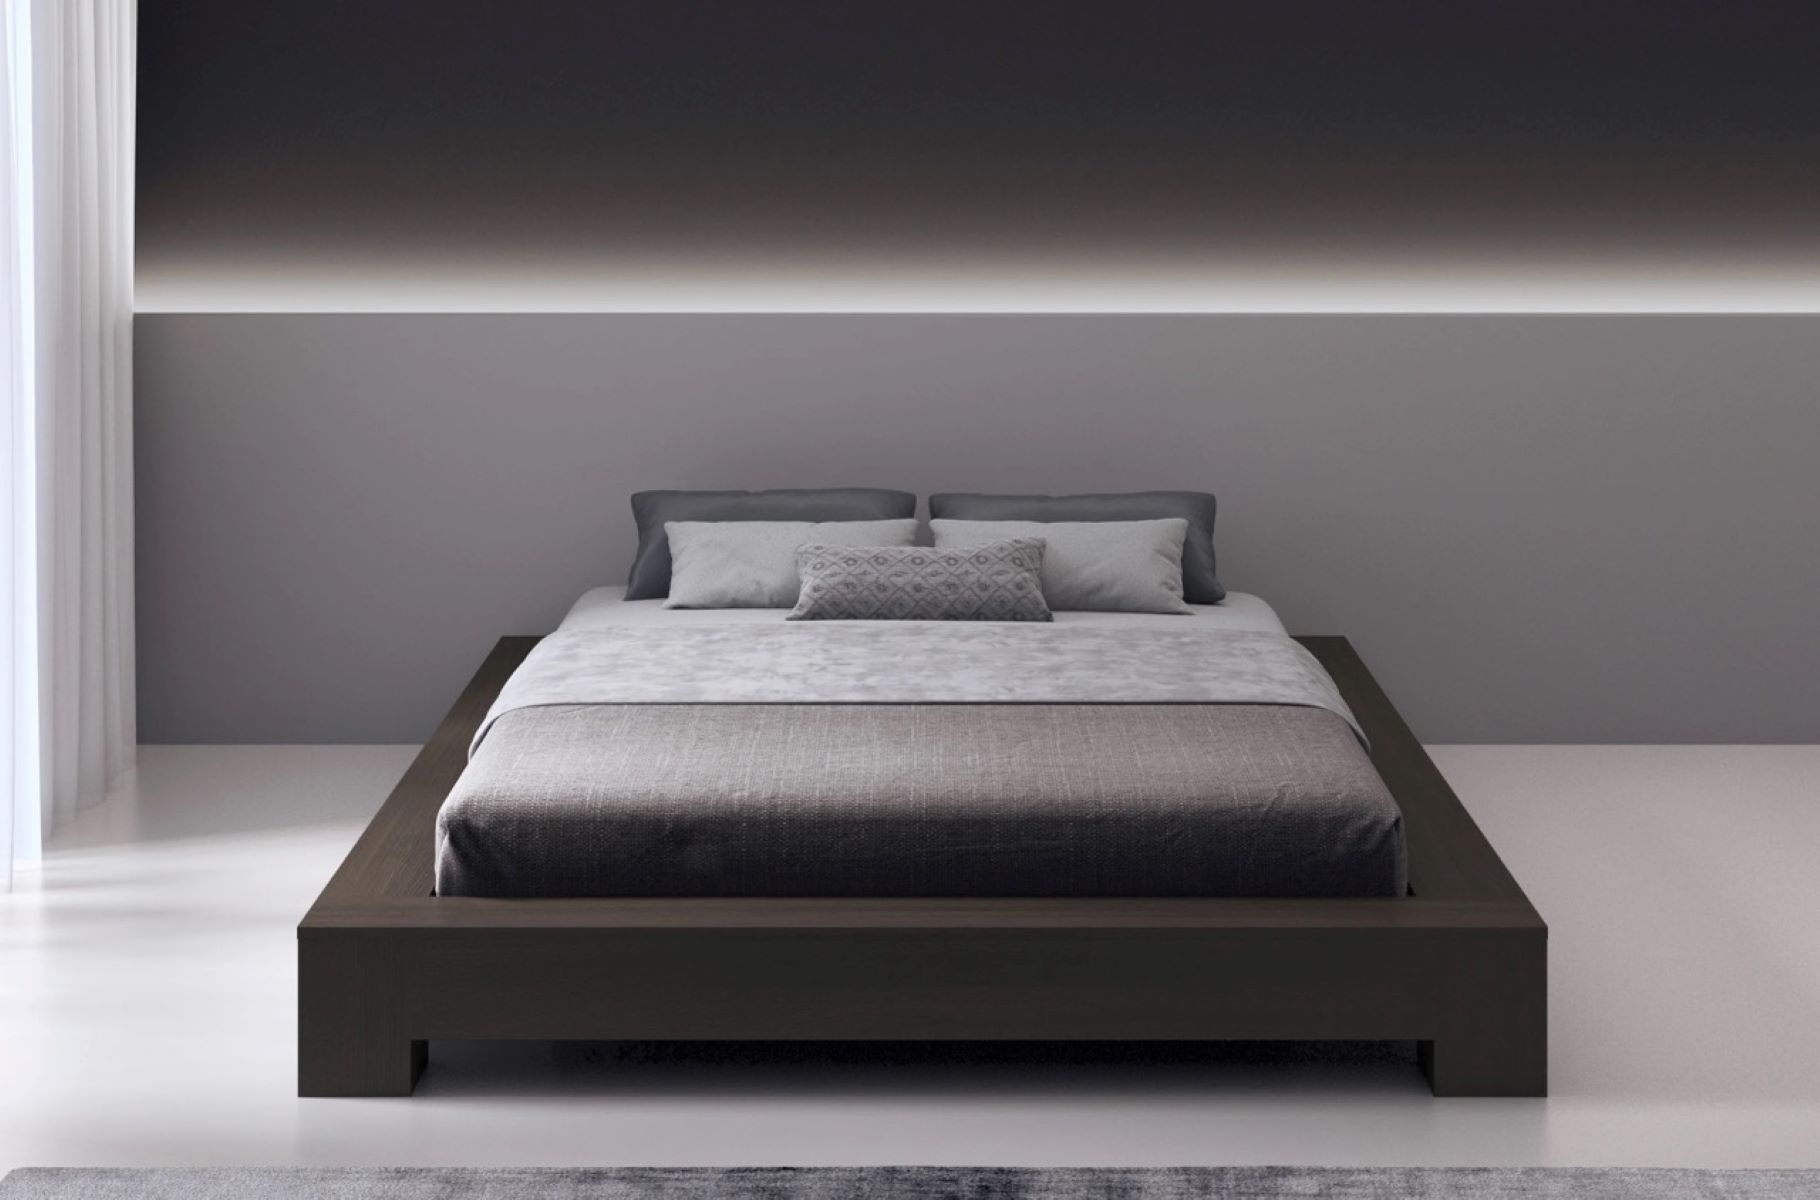 The Surprising Benefits Of Opting For A Low-Profile Bed You Never Knew!